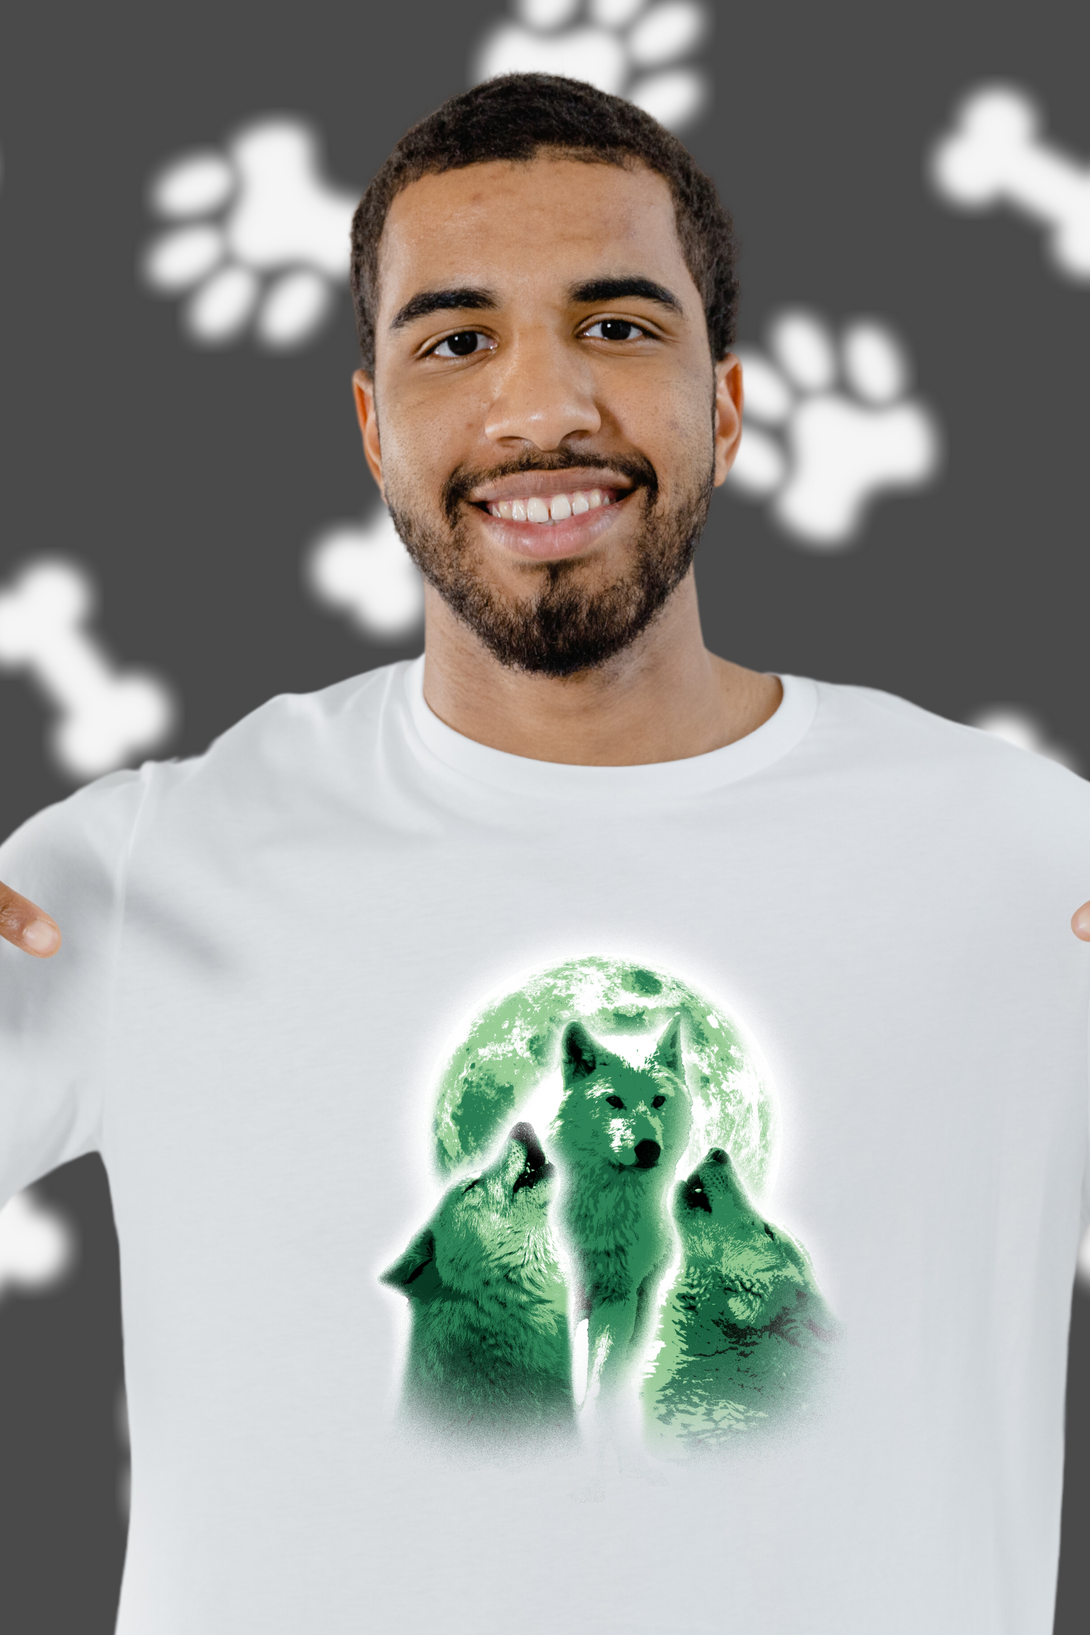 Wolves Howling Printed T-Shirt For Men - WowWaves - 4